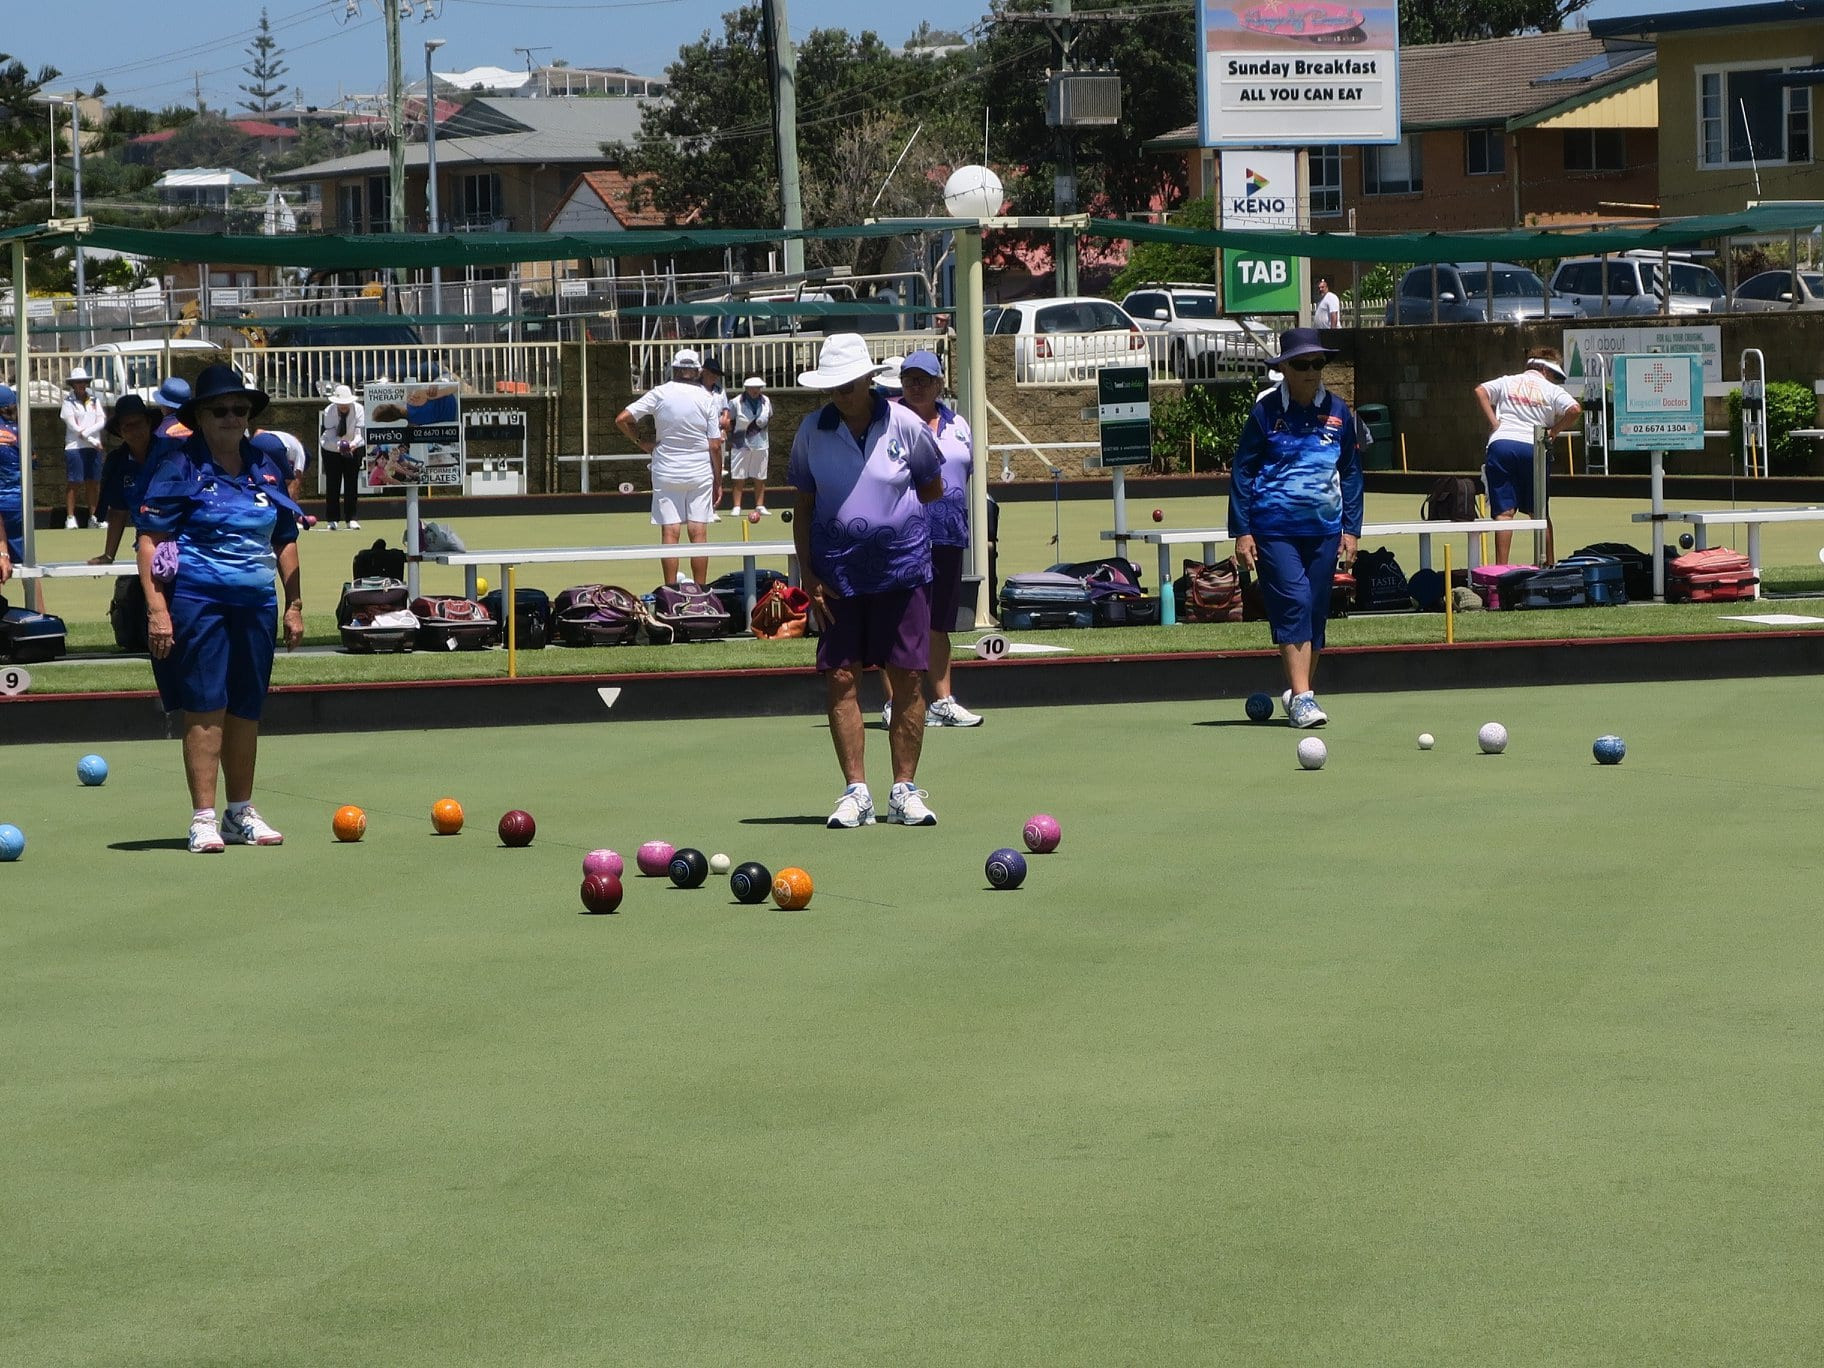 Matt Burgess is a member of Kingscliff Bowling Club in New South Wales and it is claimed he has an affinity with the grassroots of the sport ©Facebook